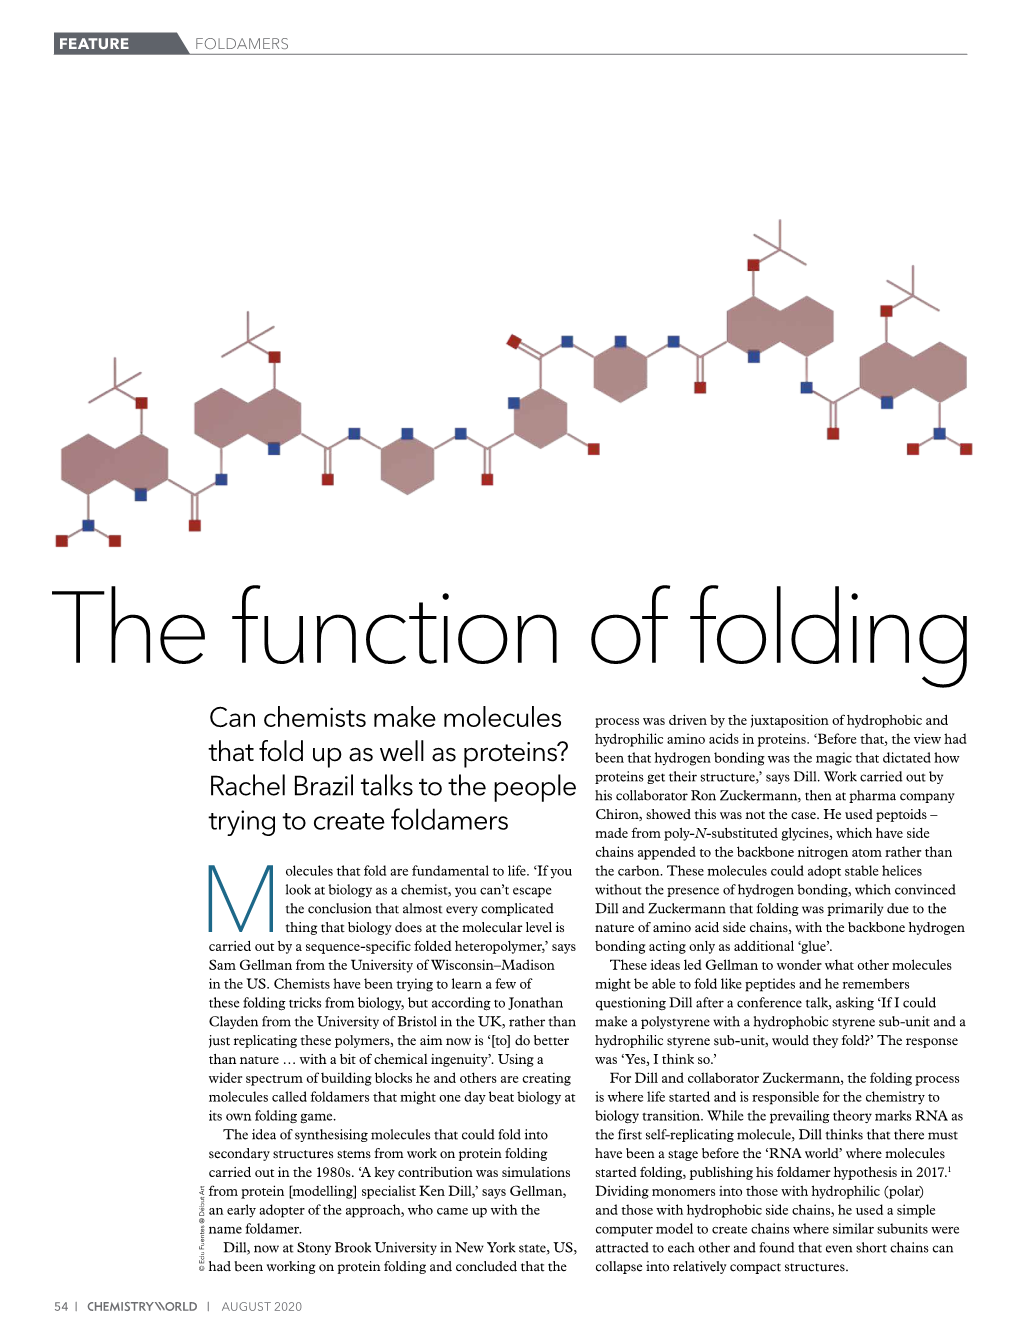 The Function of Folding